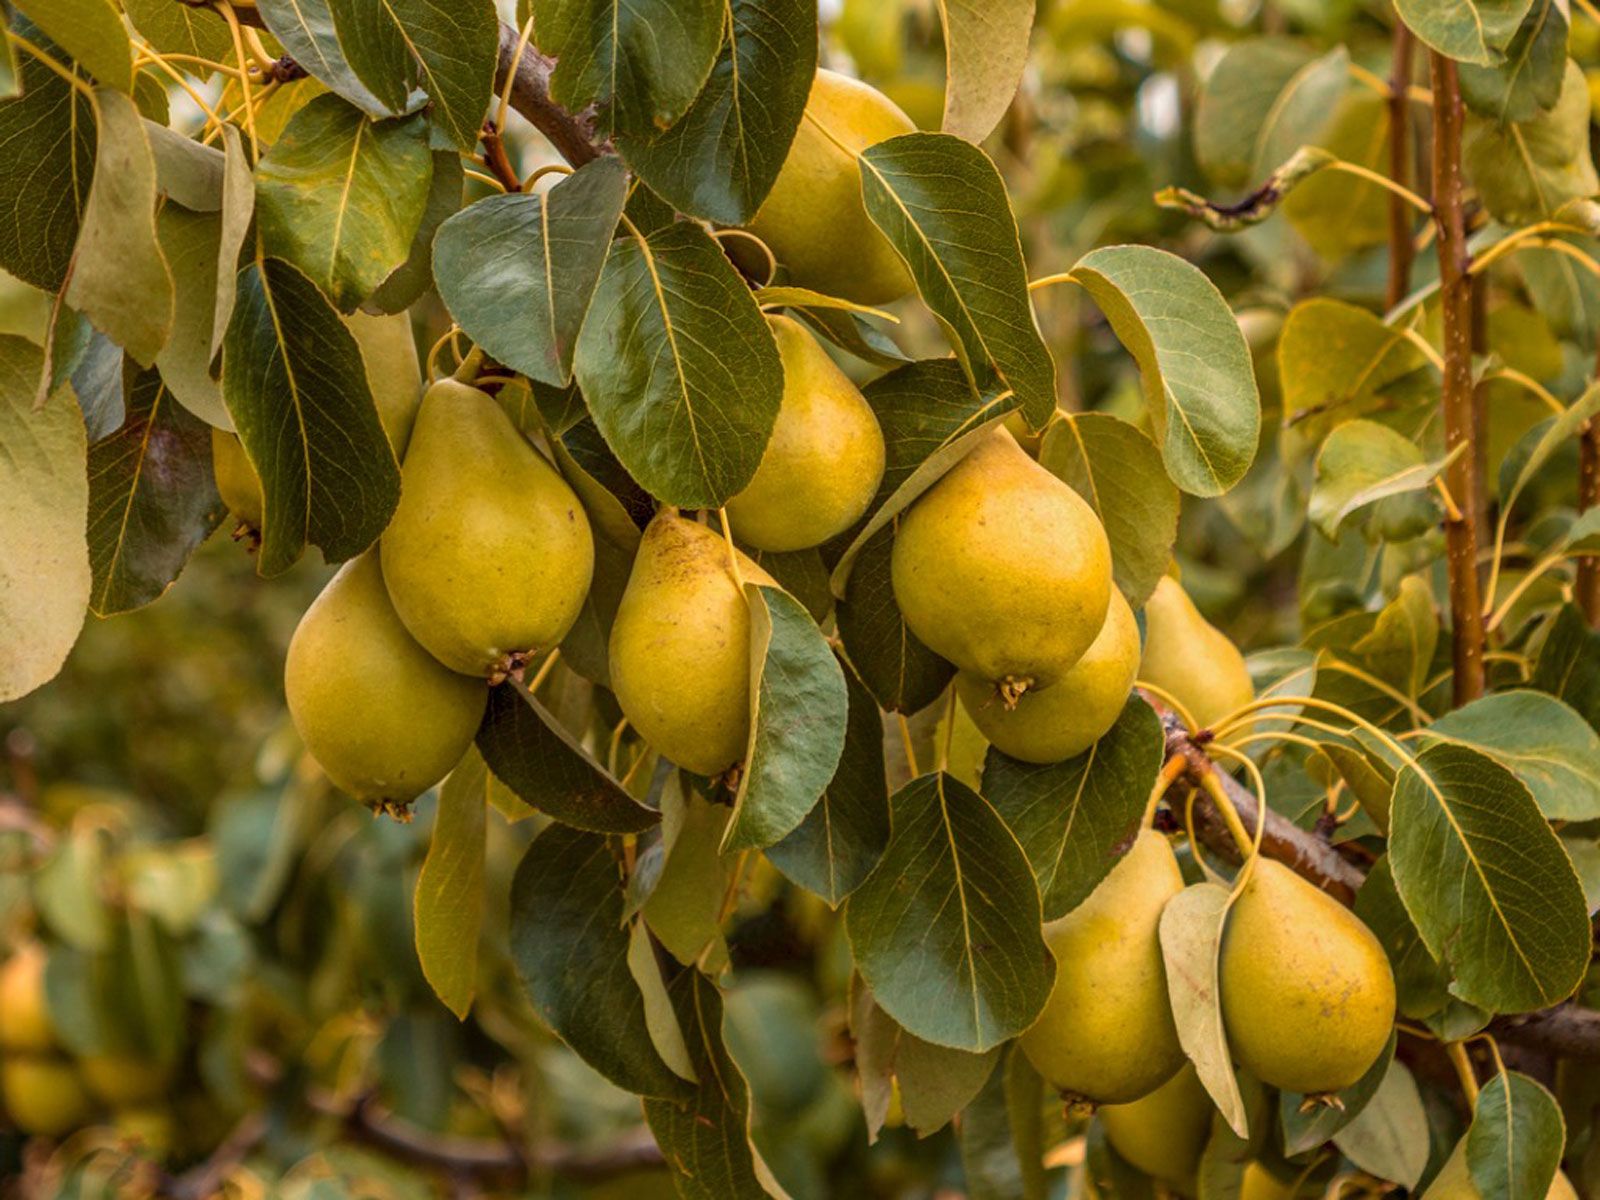 Growing Pear Trees: Tips For The Care Of Pear Trees